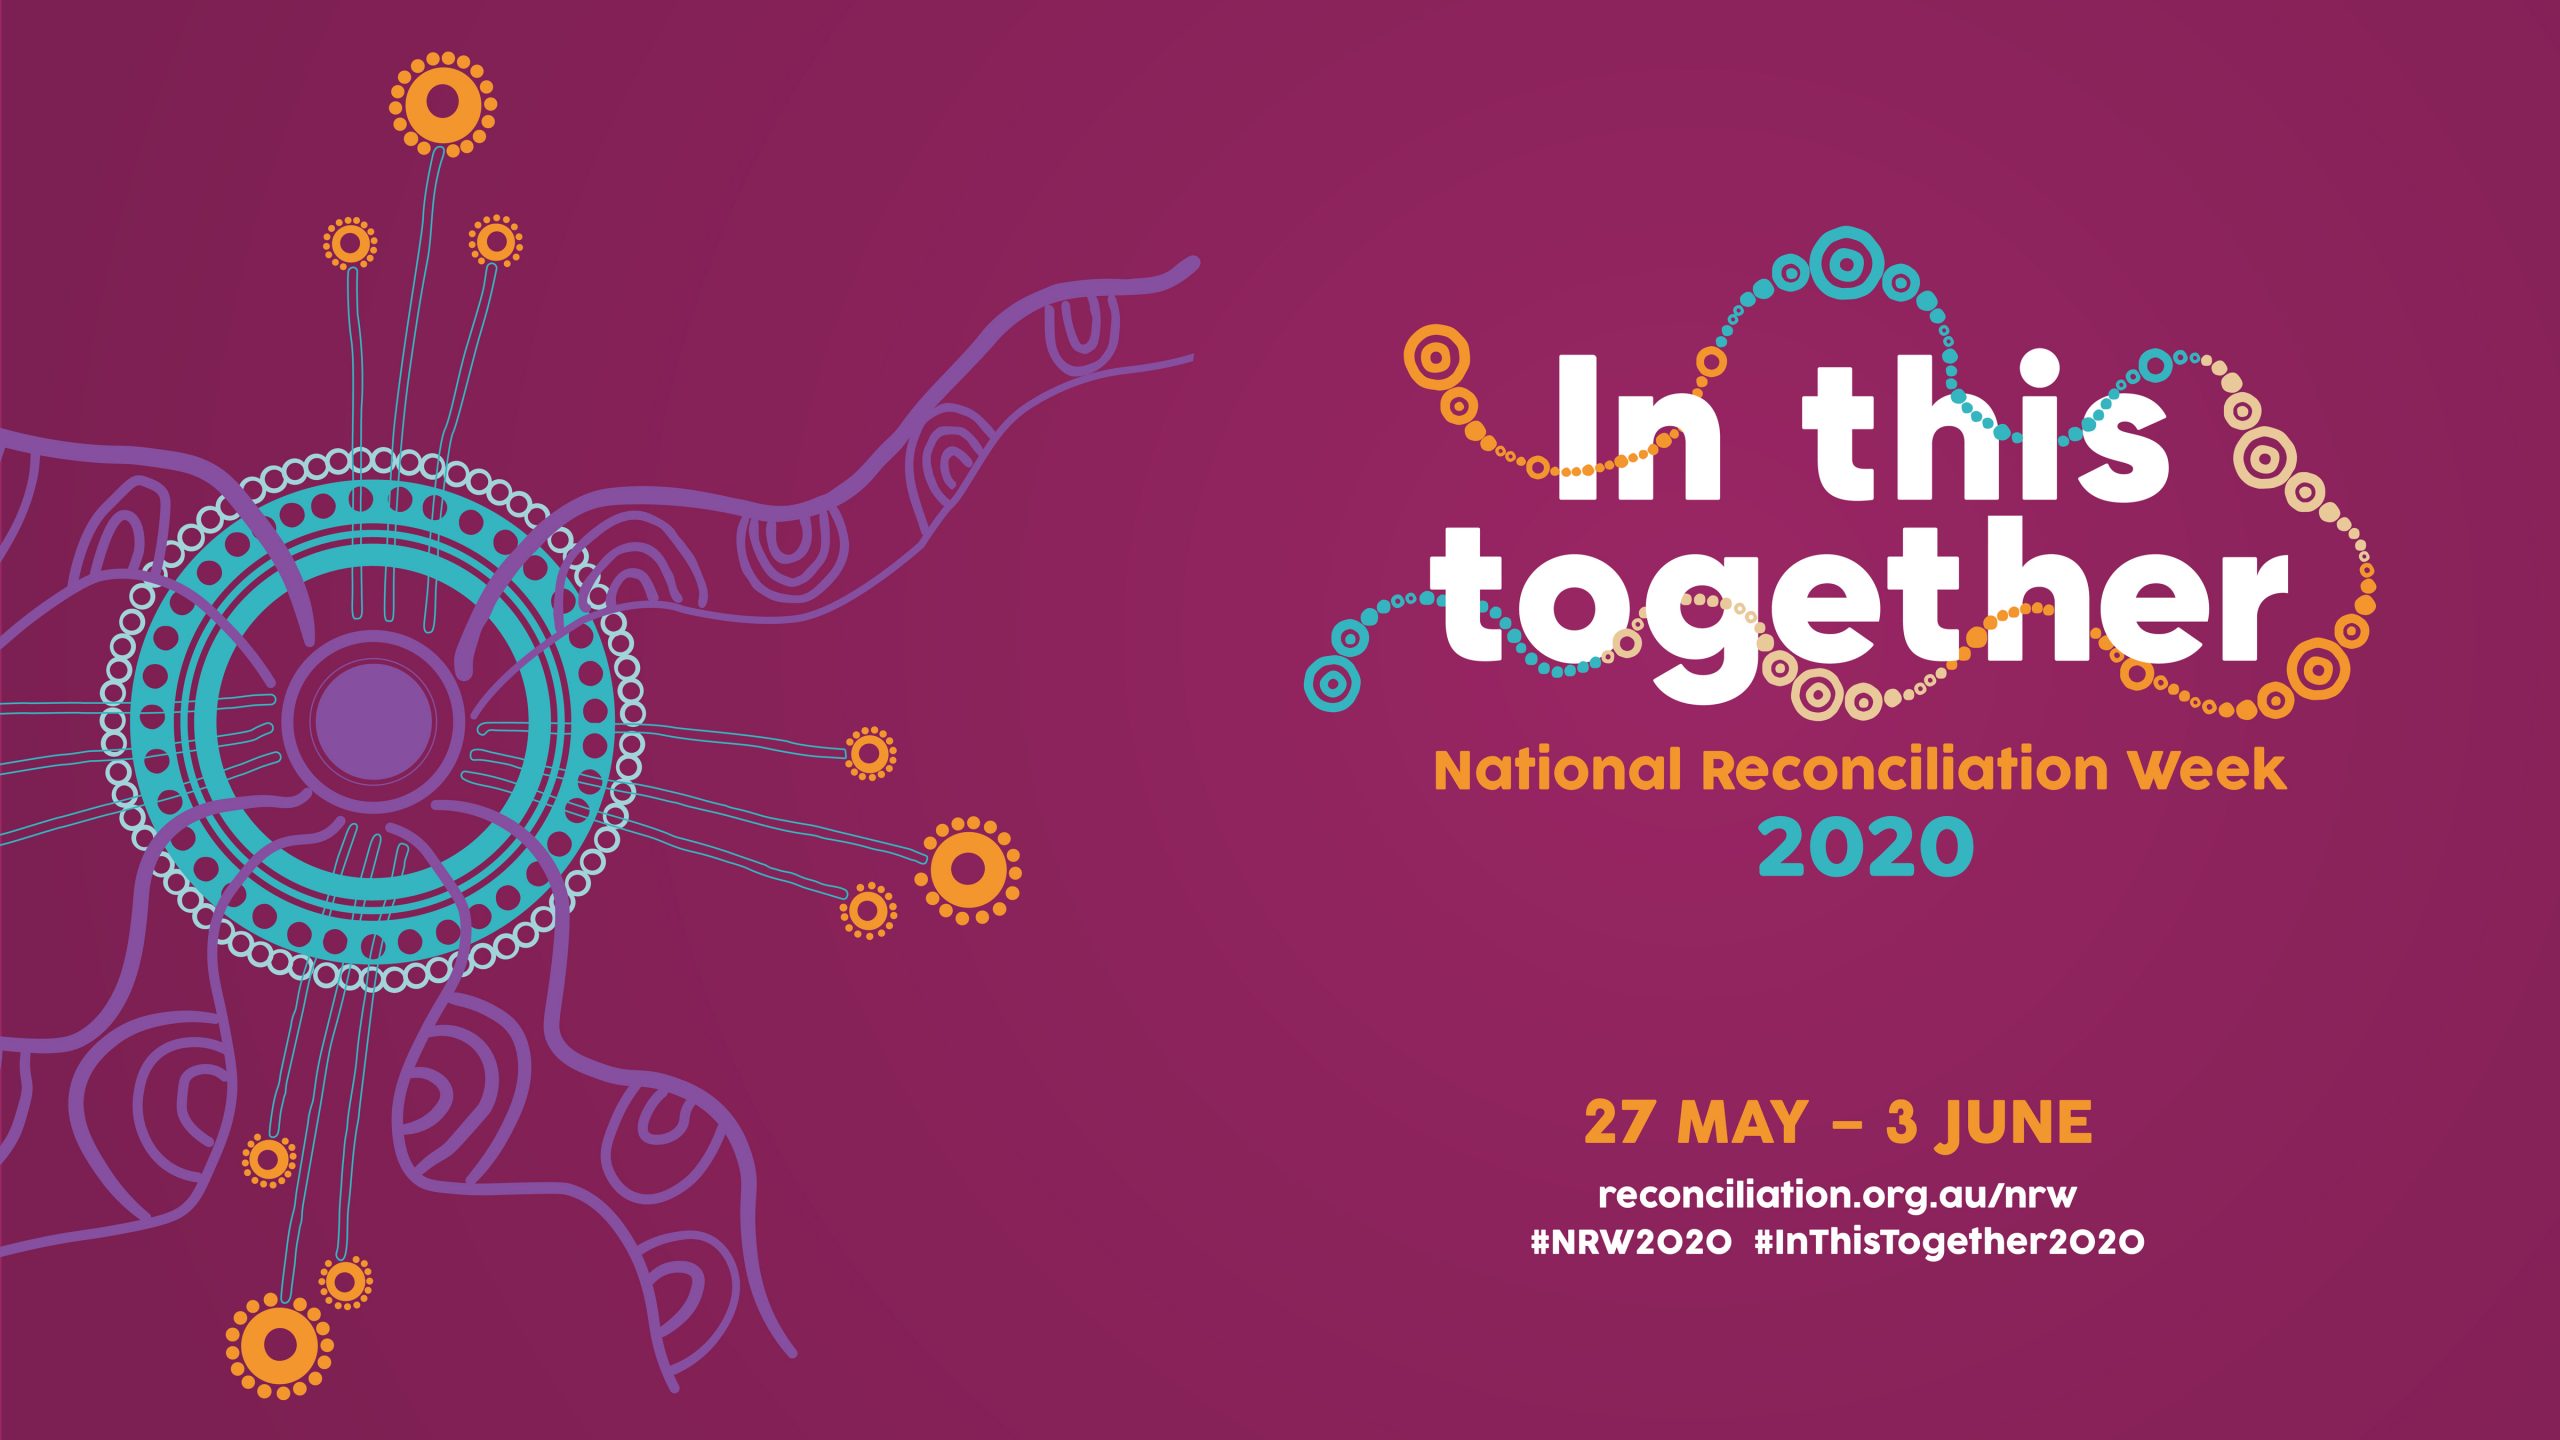 National Reconciliation Week 2020